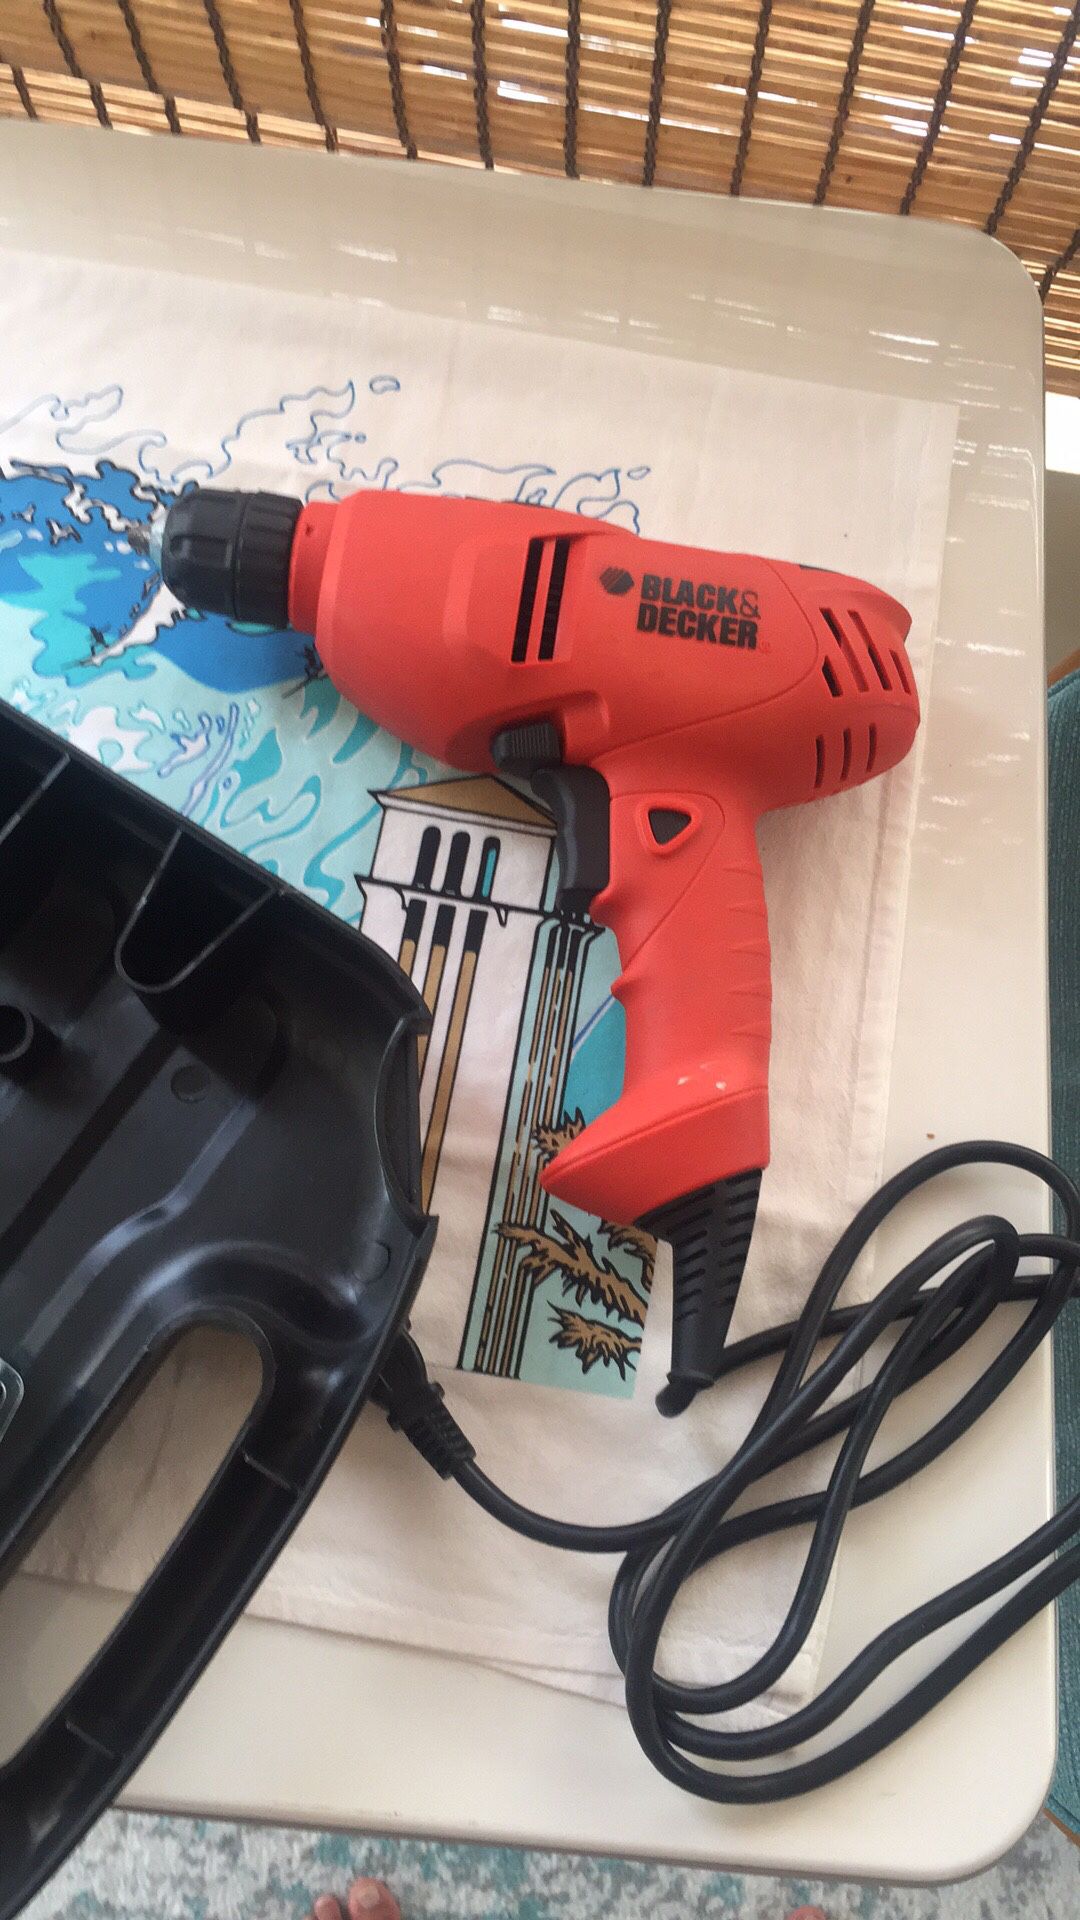 Black and decker electric drill tool